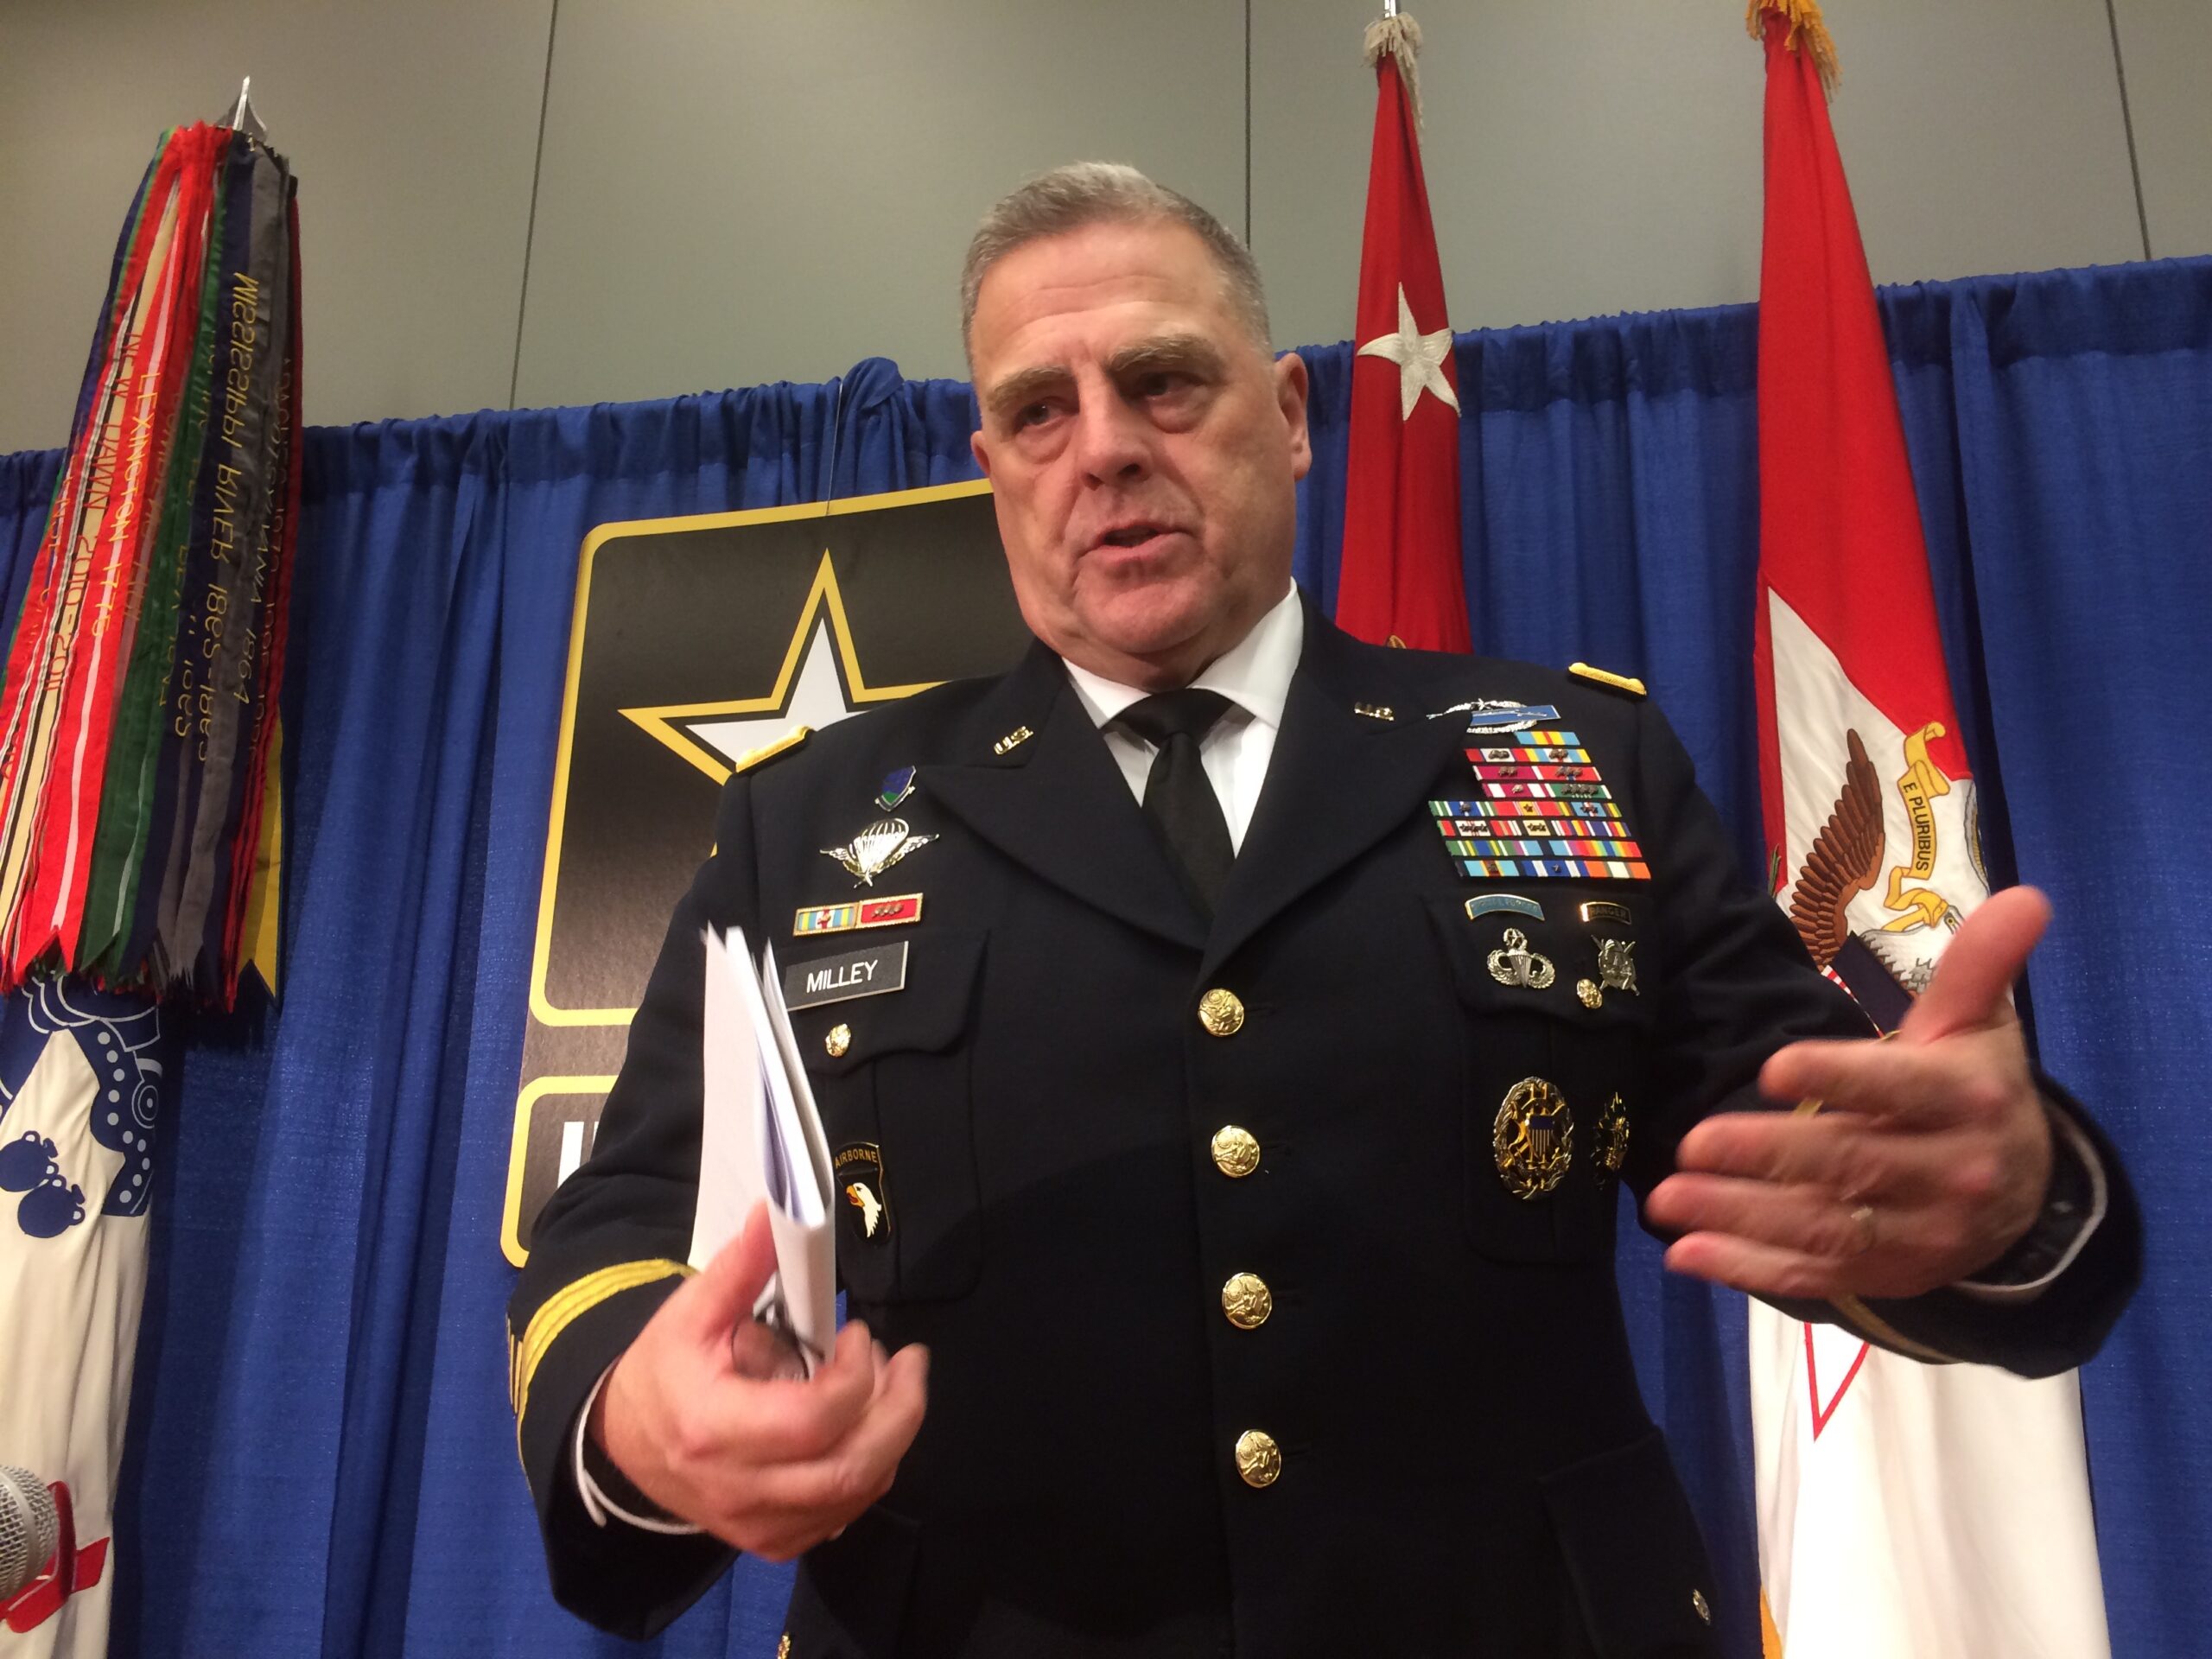 Milley Announces Biggest Buying Shift In 40 Years: Army Will Get Weapons The SOCOM Way